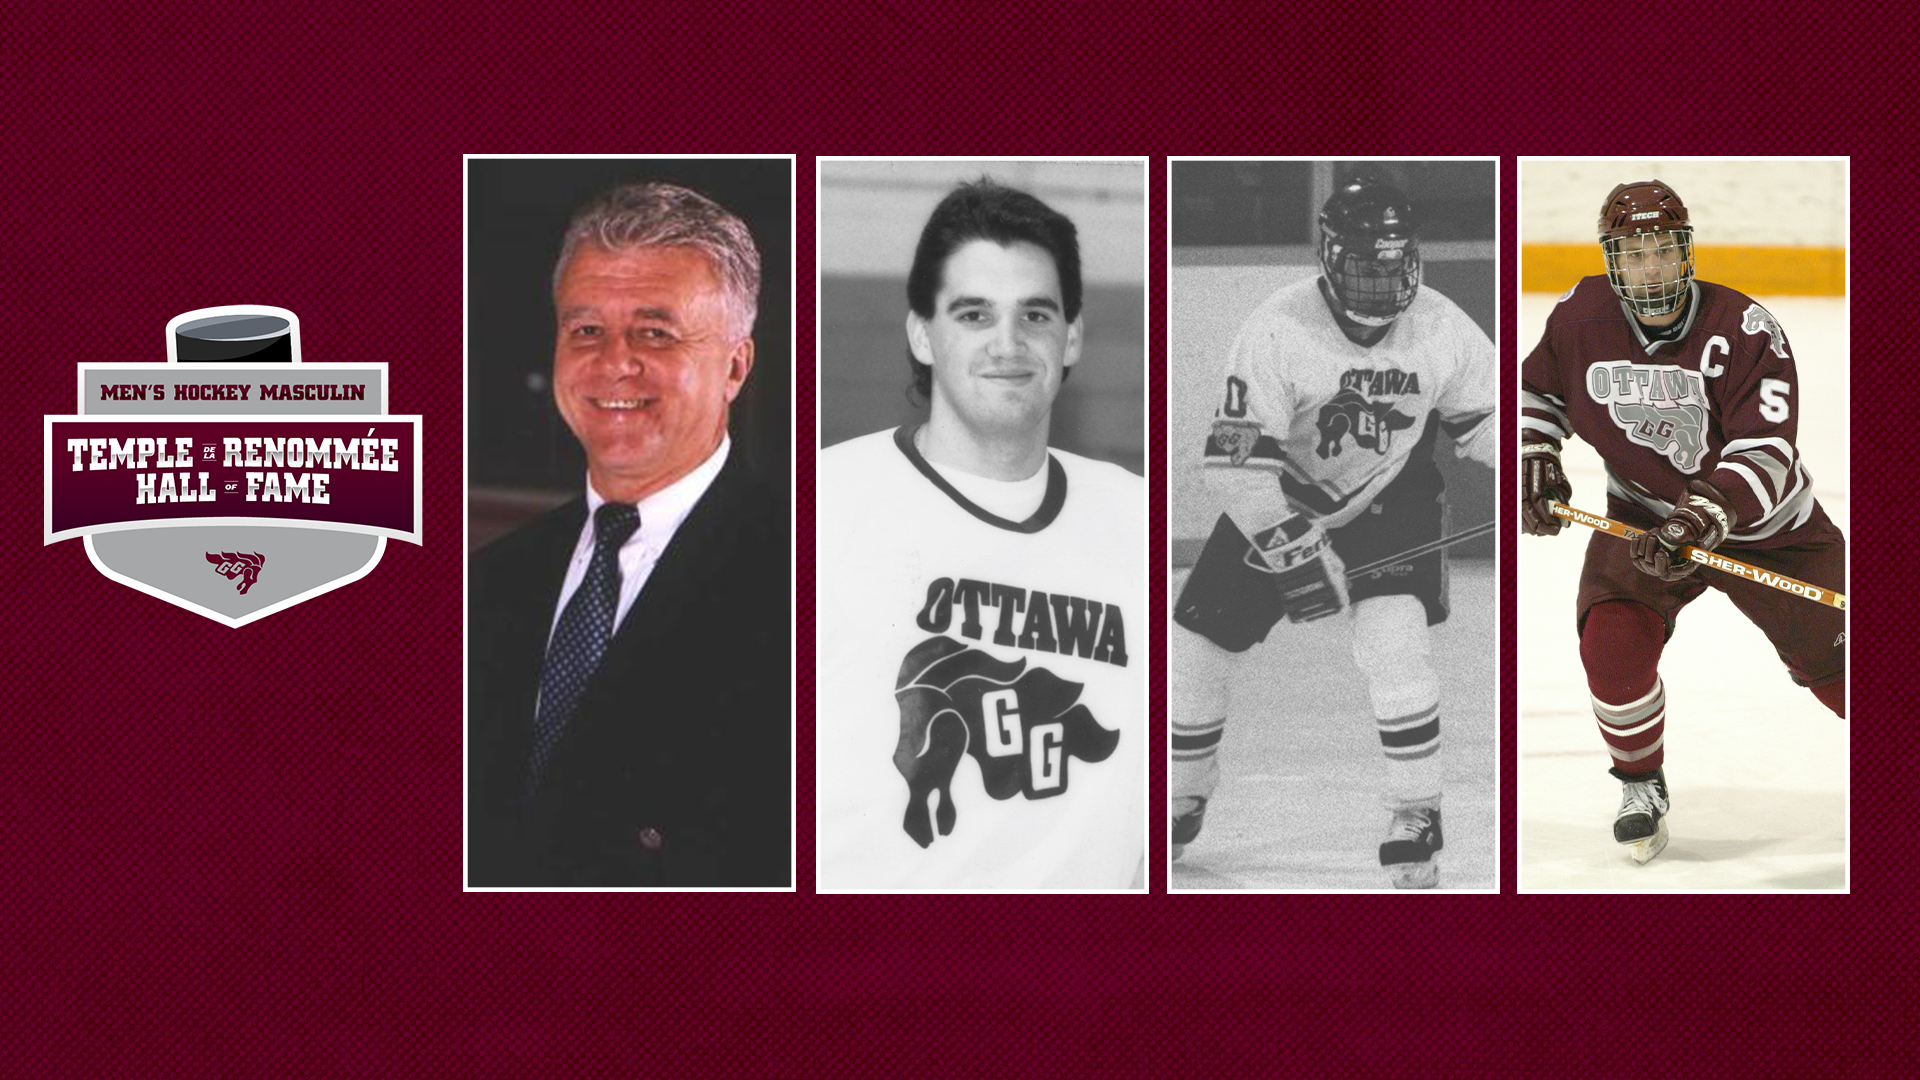 A logo for the Gee-Gees men's hockey hall of fame is flanked by two images of hall of fame inductees, from left to right coach Mickey Goulet wears a dark suit in a portrait photo, Phil Comtois wears a white Gee-Gees jersey in a portrait photo, Jey St. Aubin winds up for a shot wearing a white jersey in an action photo, and Chris Boucher looks up during play, wearing a garnet jersey with the captain's C. Thumbnail